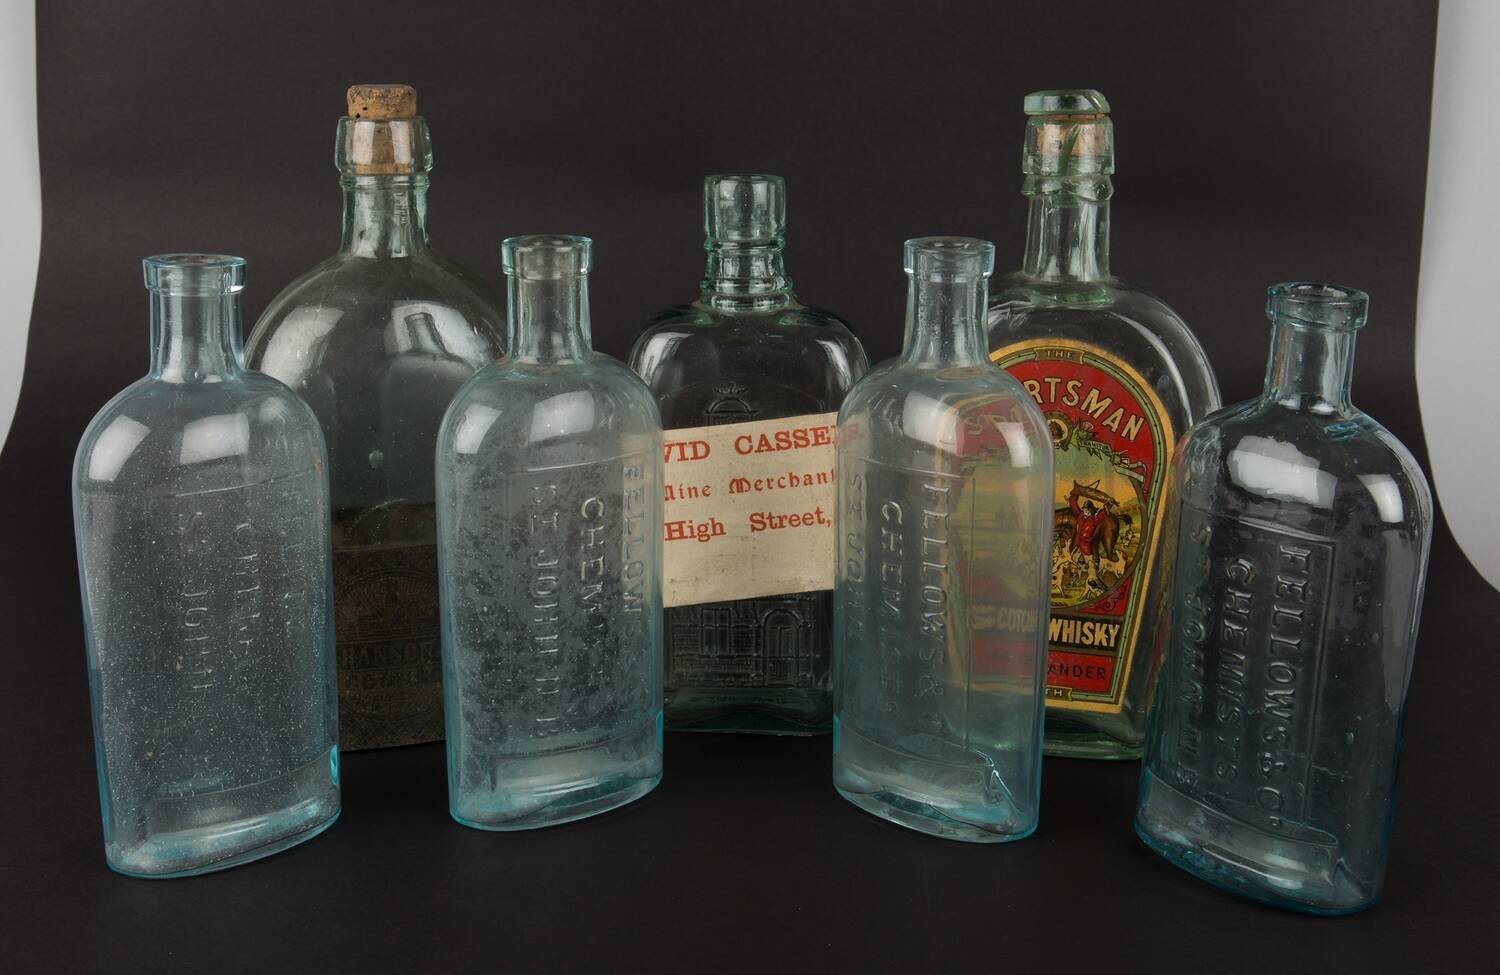 A row of empty old whisky bottles on display at Robert Burns Birthplace Museum